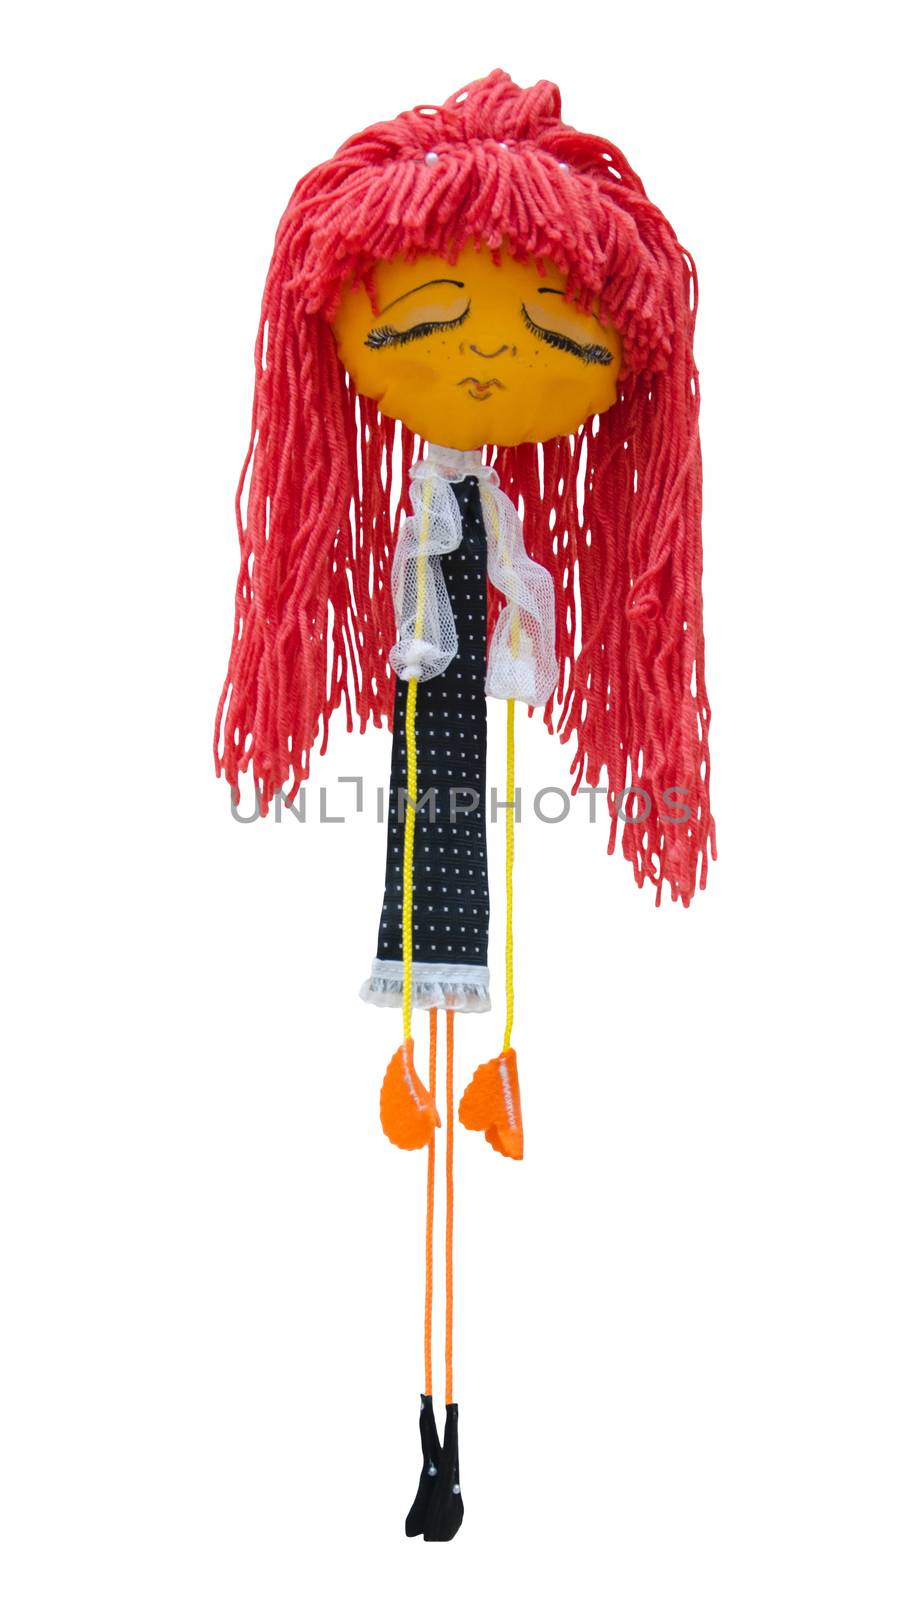 Handmade doll toy isolated thin embarrassed sad girl in a dress  by pt-home